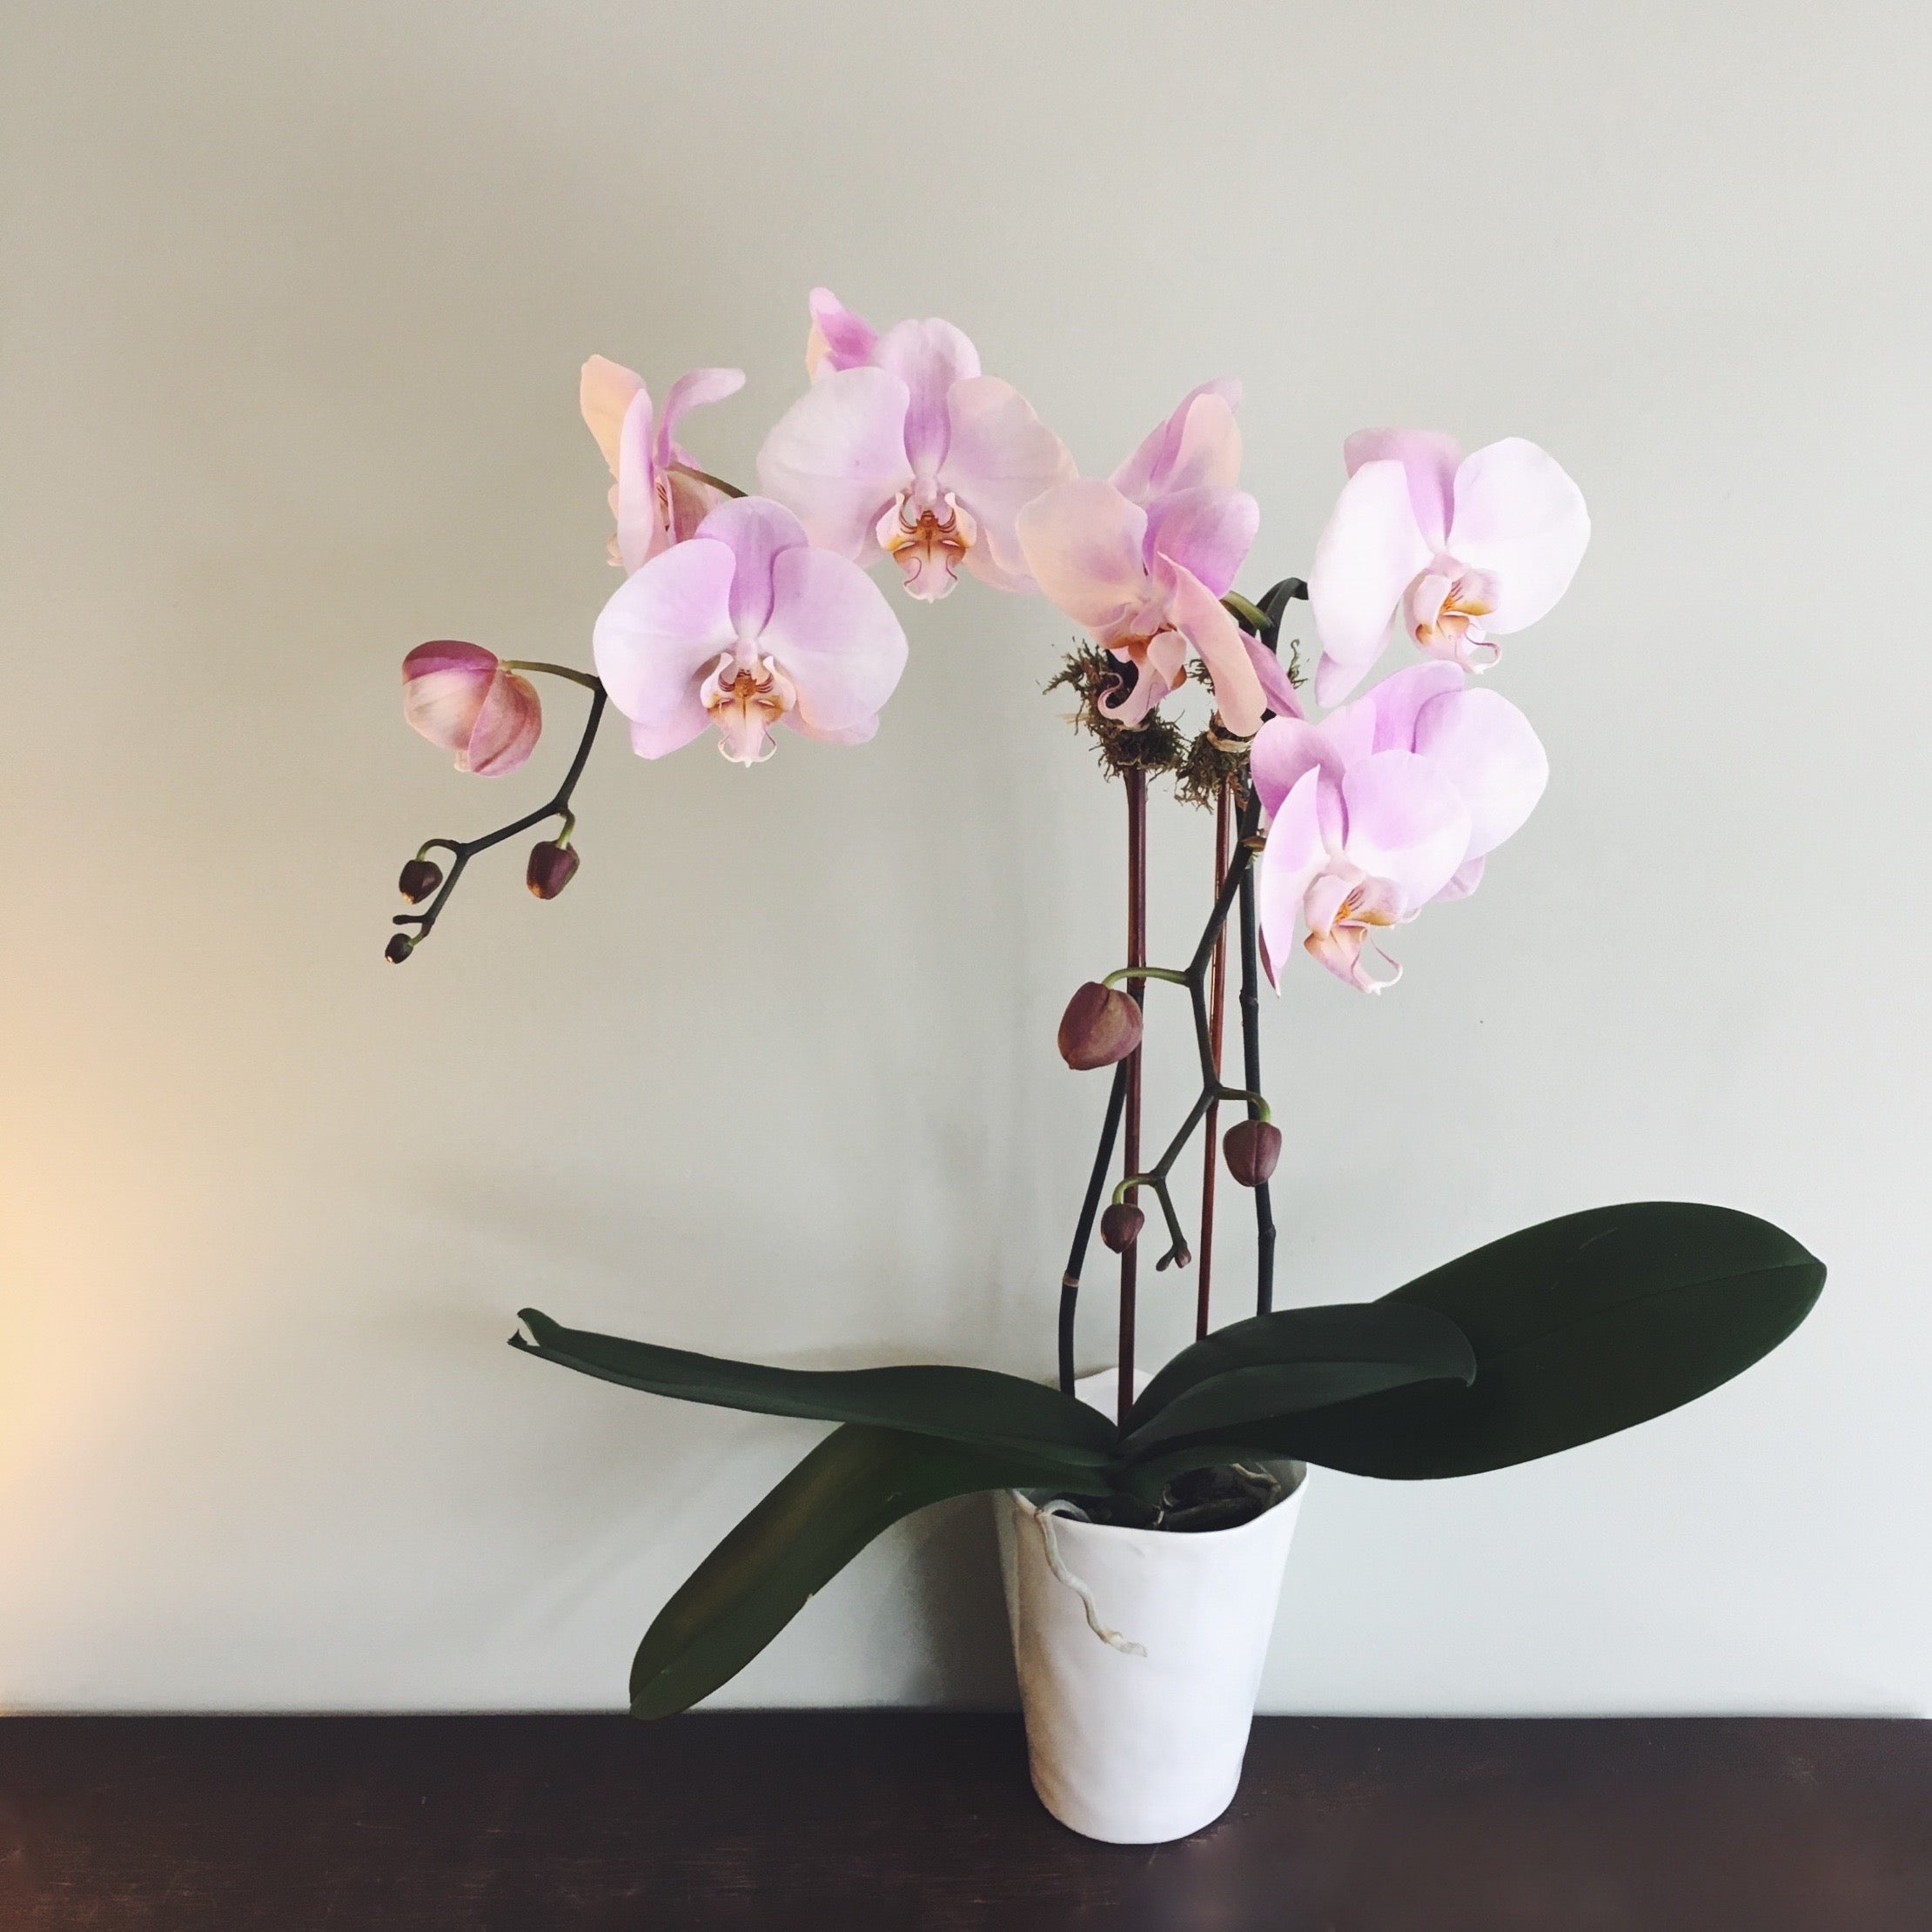 Caring for Orchids